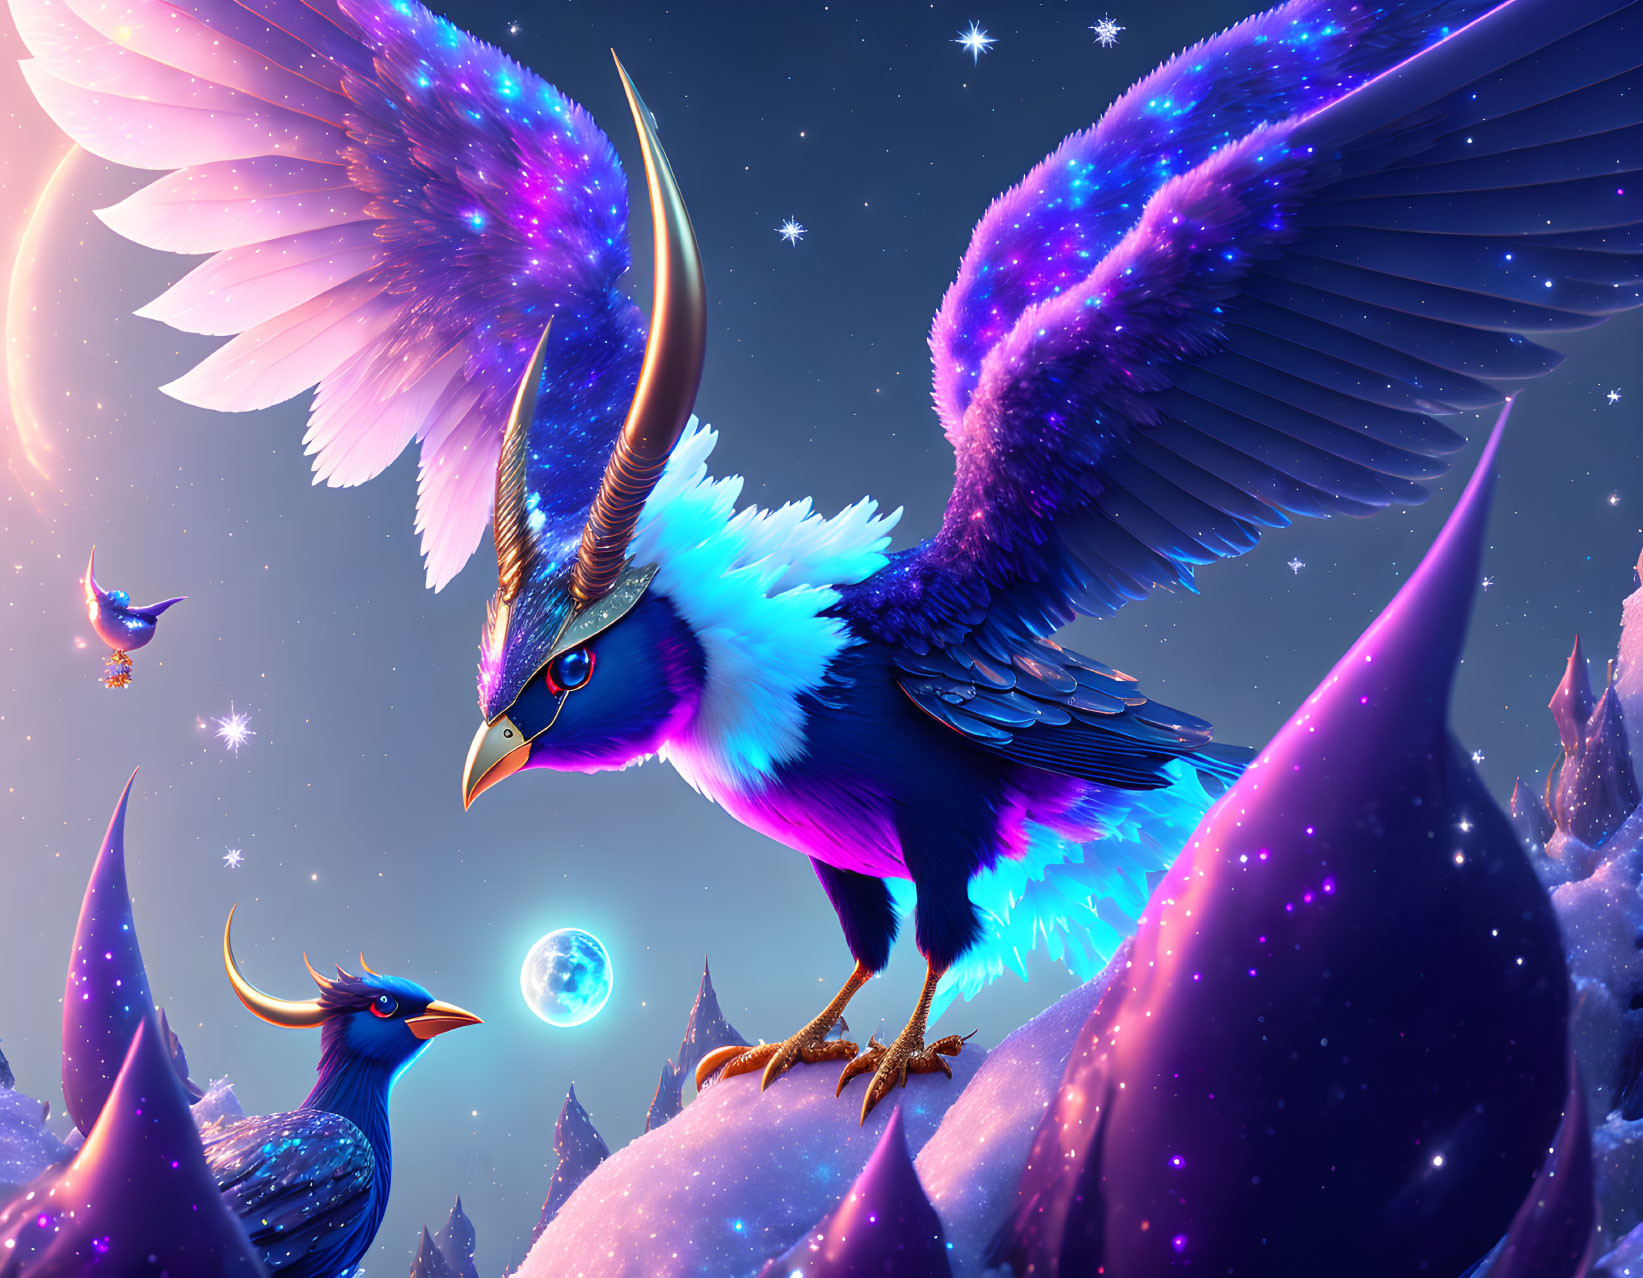 Majestic mythical bird with glowing star-filled wings in cosmic landscape